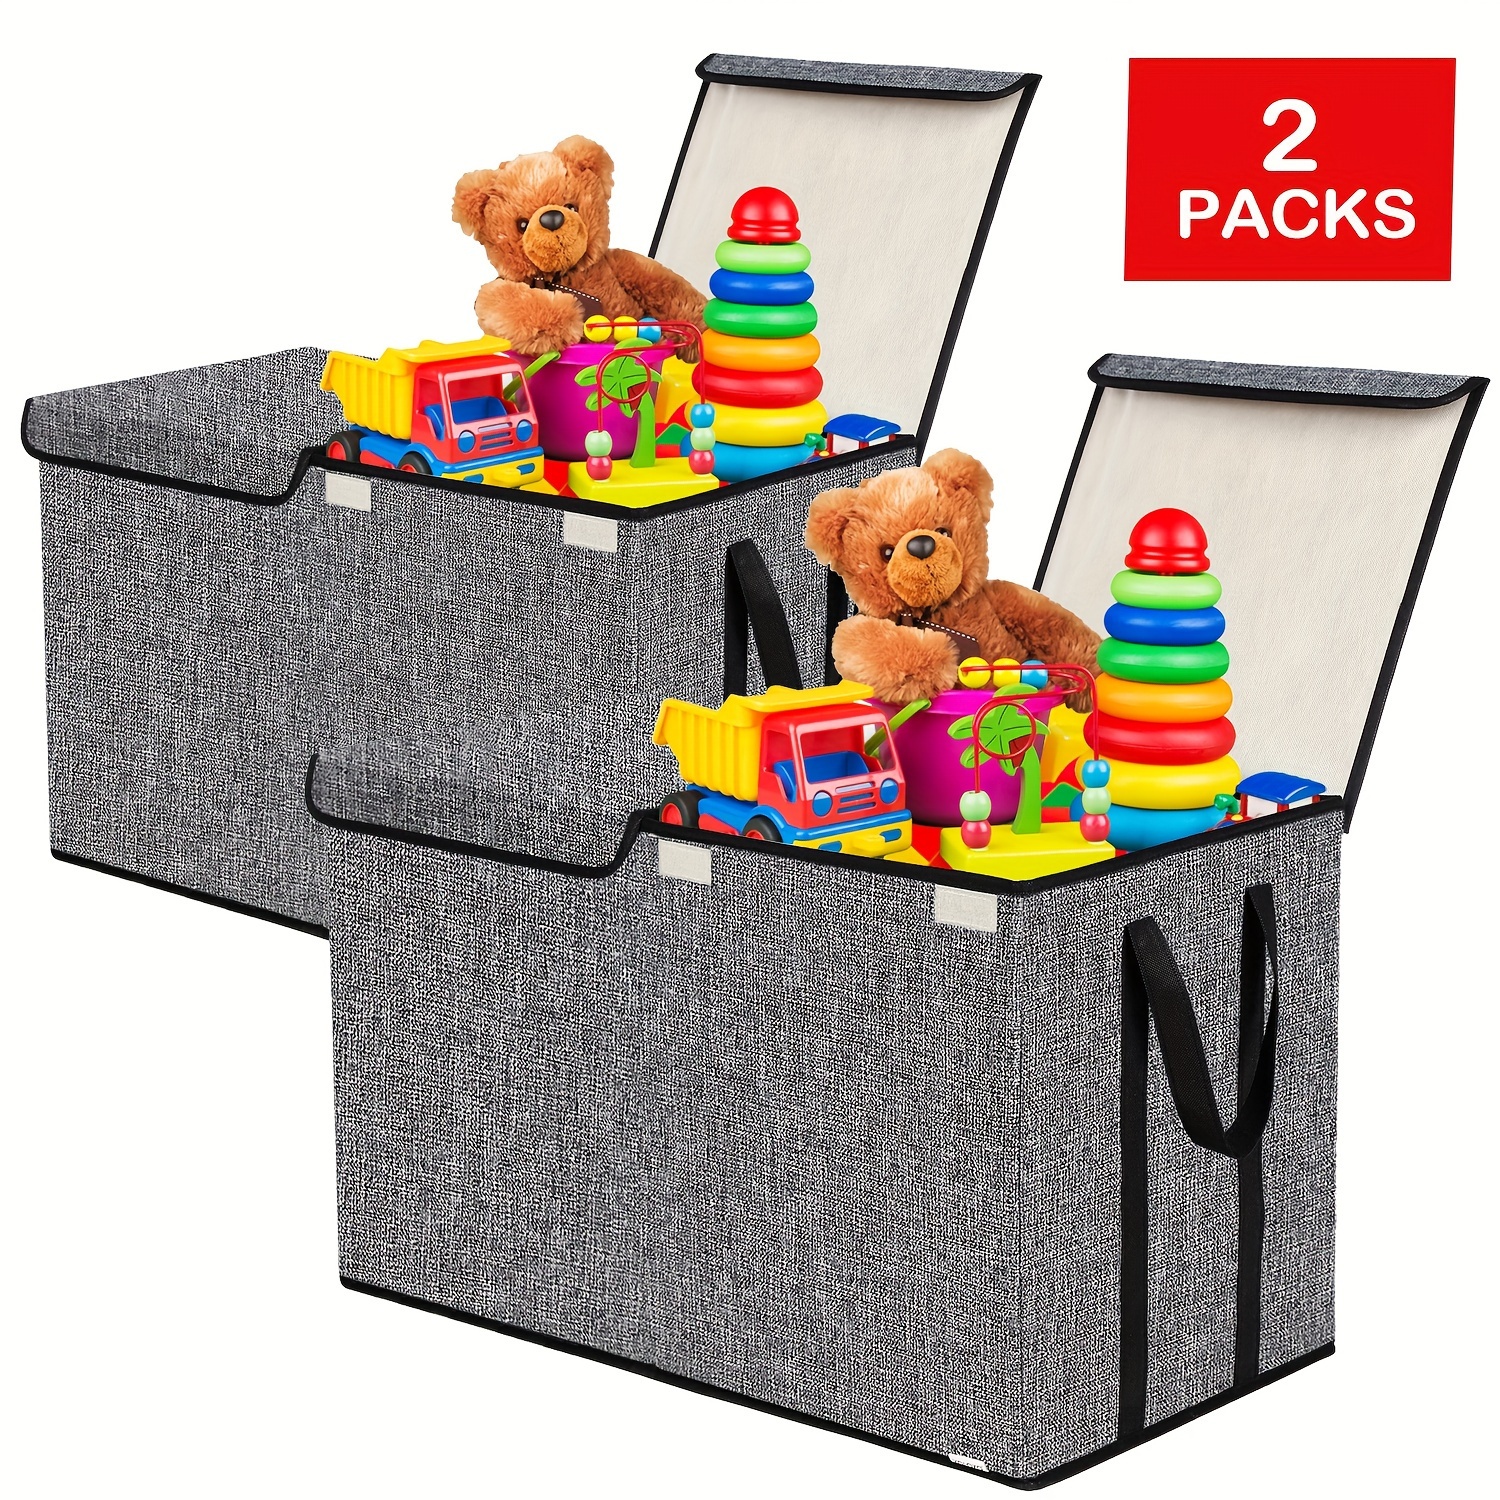 

2pcs/set Toy Box Chest, Collapsible Sturdy Storage Bins With Lids, Extra Large Kids Toy Storage Organizer Boxes Bins Baskets For Kids, Boys, Girls, Nursery Room, Playroom, Closet